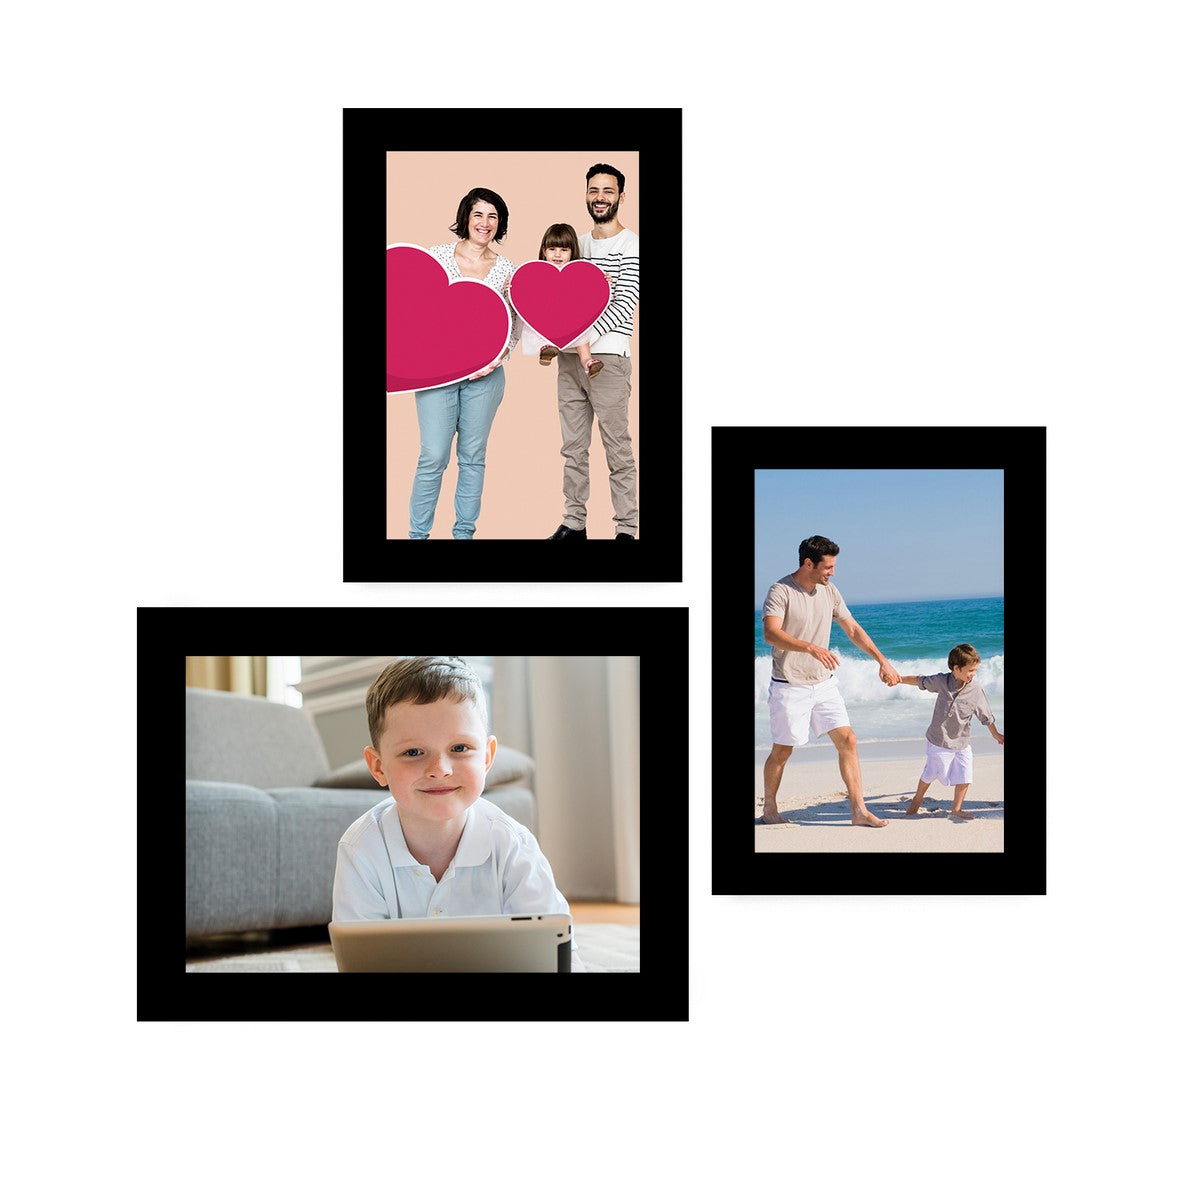 Memory Wall Collage Photo Frame - Set of 3 Photo Frames for 2 Photos of 5"x7" and 1 Photo of 6"x8"